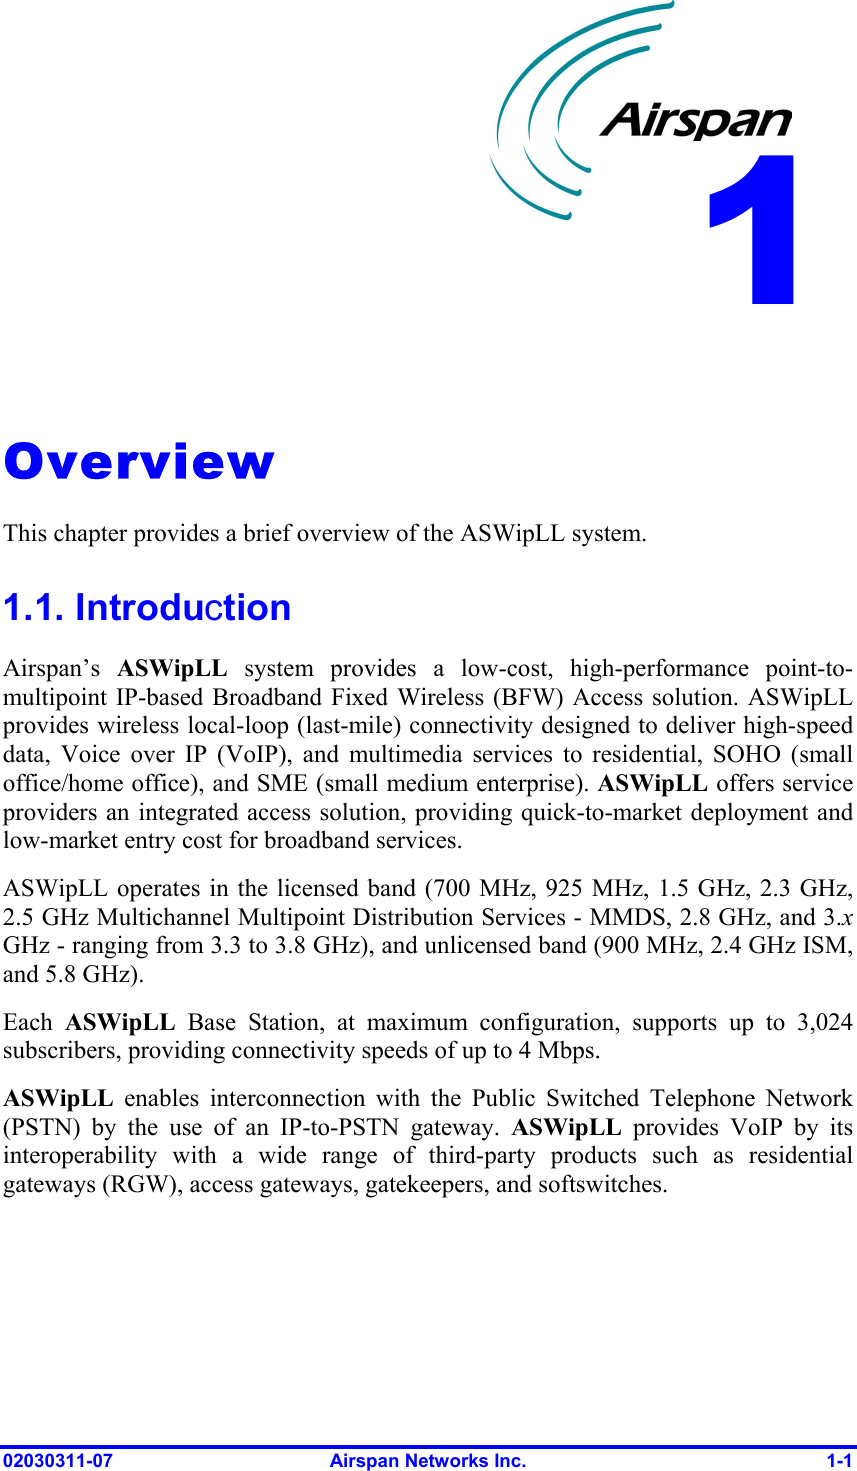  02030311-07  Airspan Networks Inc.  1-1   Overview This chapter provides a brief overview of the ASWipLL system. 1.1. Introduction Airspan’s  ASWipLL system provides a low-cost, high-performance point-to-multipoint IP-based Broadband Fixed Wireless (BFW) Access solution. ASWipLL provides wireless local-loop (last-mile) connectivity designed to deliver high-speed data, Voice over IP (VoIP), and multimedia services to residential, SOHO (small office/home office), and SME (small medium enterprise). ASWipLL offers service providers an integrated access solution, providing quick-to-market deployment and low-market entry cost for broadband services. ASWipLL operates in the licensed band (700 MHz, 925 MHz, 1.5 GHz, 2.3 GHz, 2.5 GHz Multichannel Multipoint Distribution Services - MMDS, 2.8 GHz, and 3.x GHz - ranging from 3.3 to 3.8 GHz), and unlicensed band (900 MHz, 2.4 GHz ISM, and 5.8 GHz).  Each  ASWipLL Base Station, at maximum configuration, supports up to 3,024 subscribers, providing connectivity speeds of up to 4 Mbps. ASWipLL enables interconnection with the Public Switched Telephone Network (PSTN) by the use of an IP-to-PSTN gateway. ASWipLL provides VoIP by its interoperability with a wide range of third-party products such as residential gateways (RGW), access gateways, gatekeepers, and softswitches. 1 